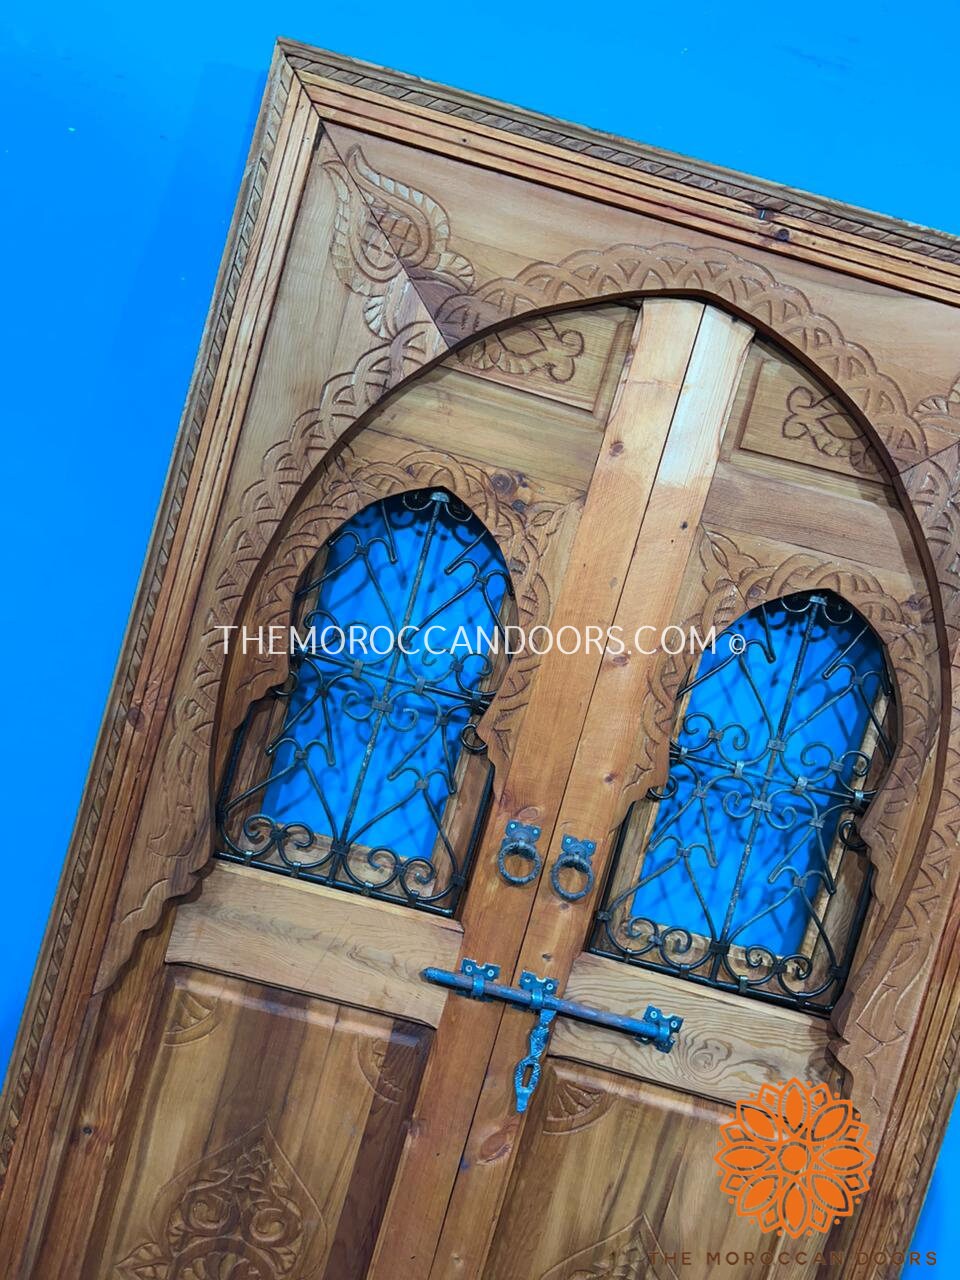 Traditional Moroccan Door Carved Wooden Door, With Two Windows In Wrought Iron Worked A Hand. Wall Decor For Your Home, Custom Wooden Doors.